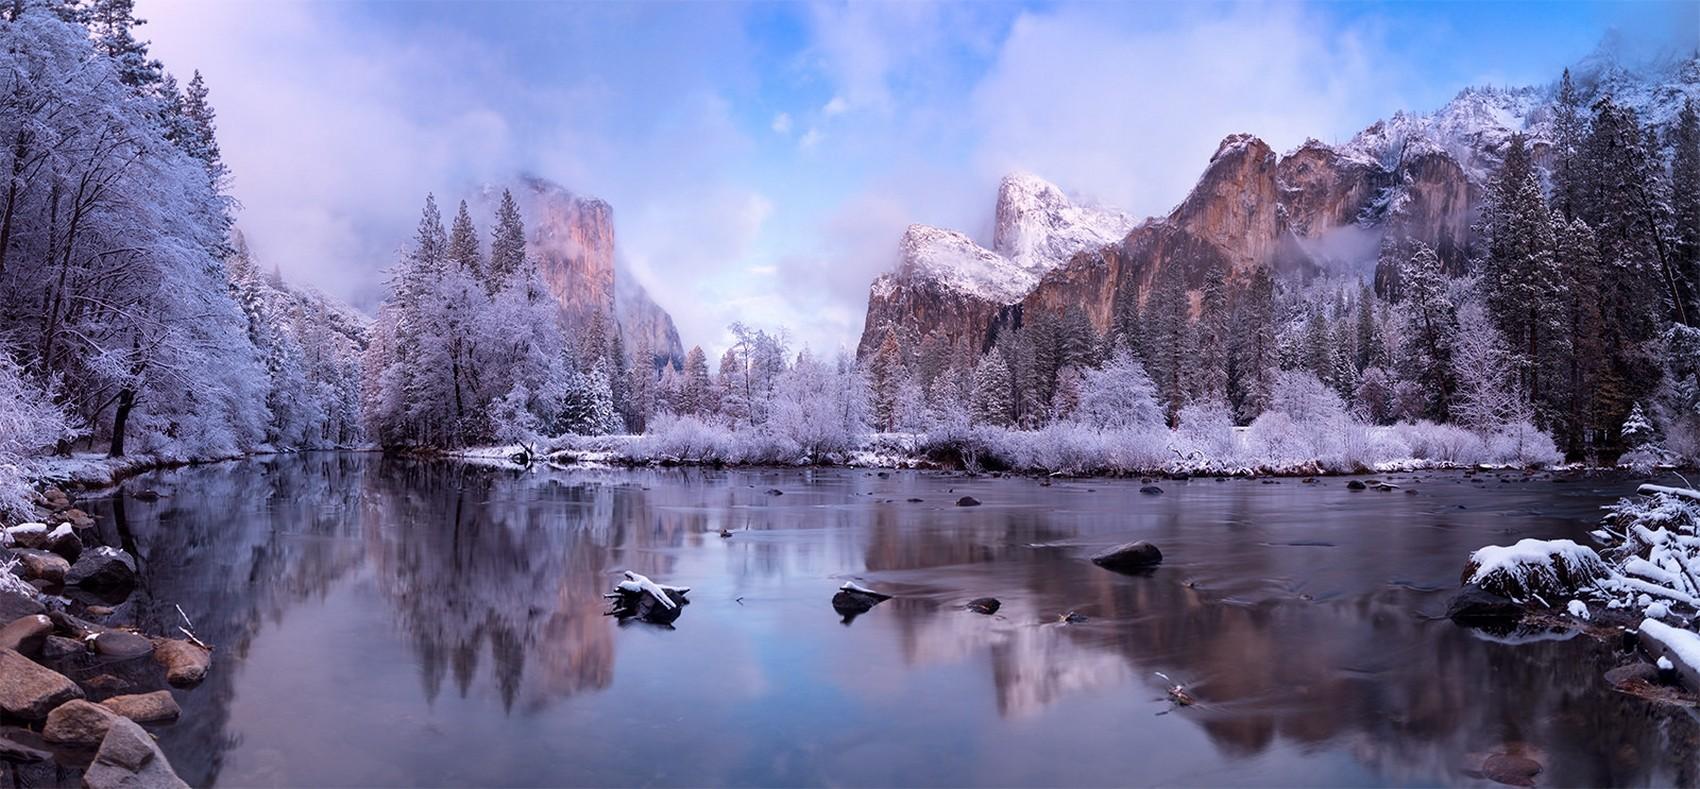 #river, #photography, #California, #winter, #snow, #forest